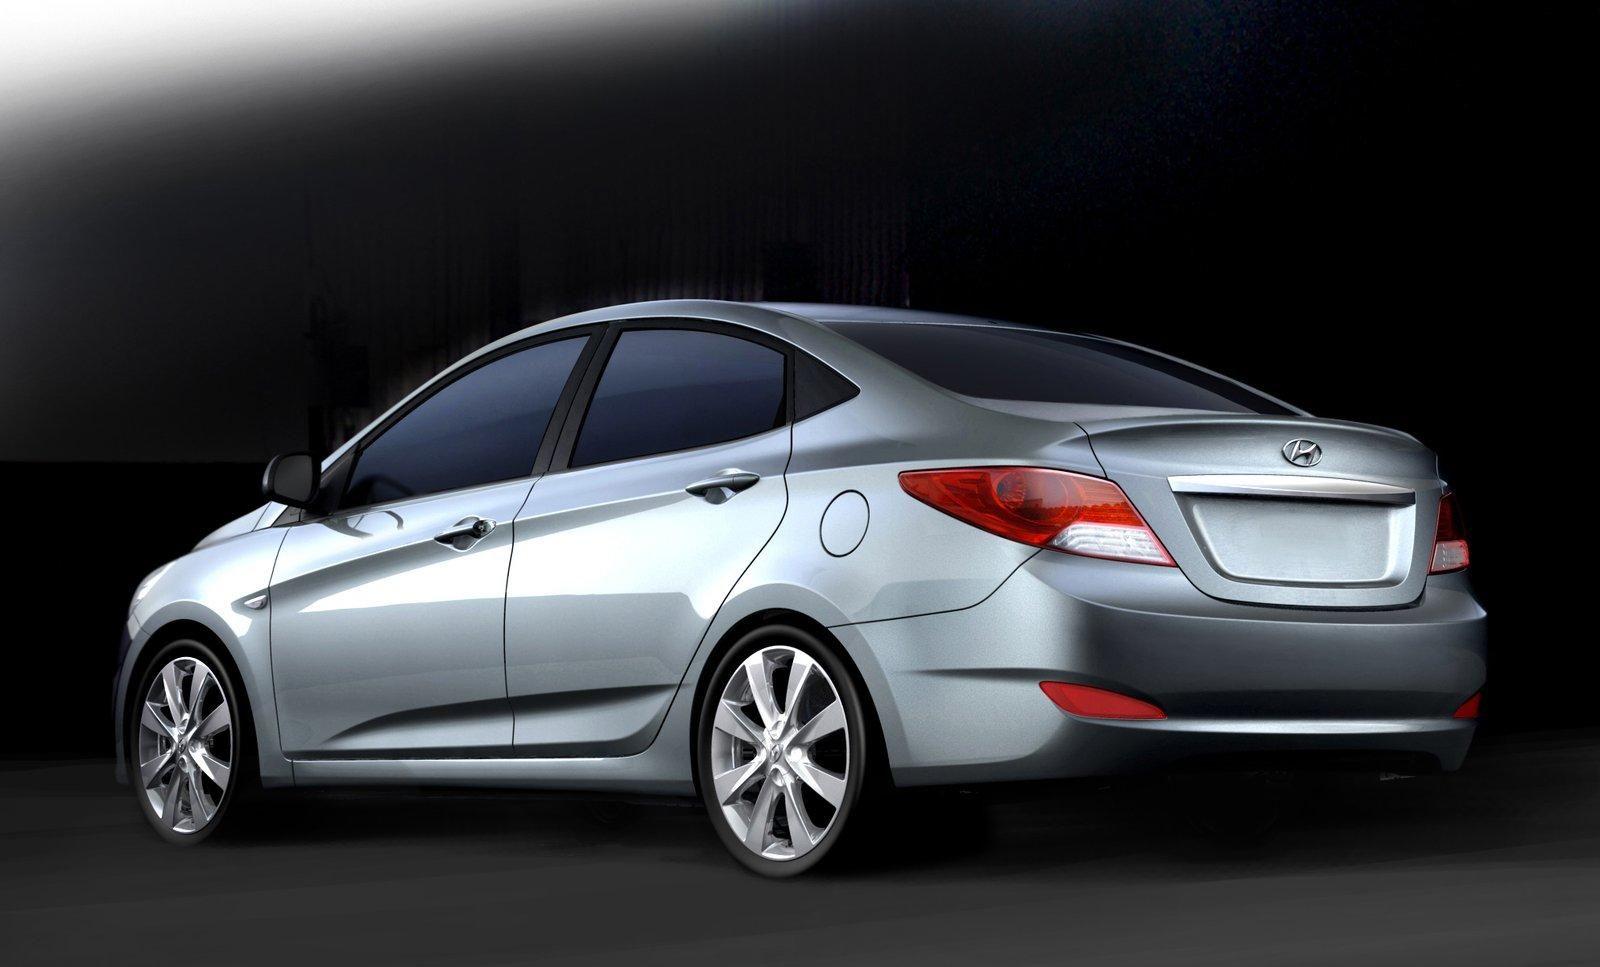 Hyundai Verna | Accent photo pictures at high resolution